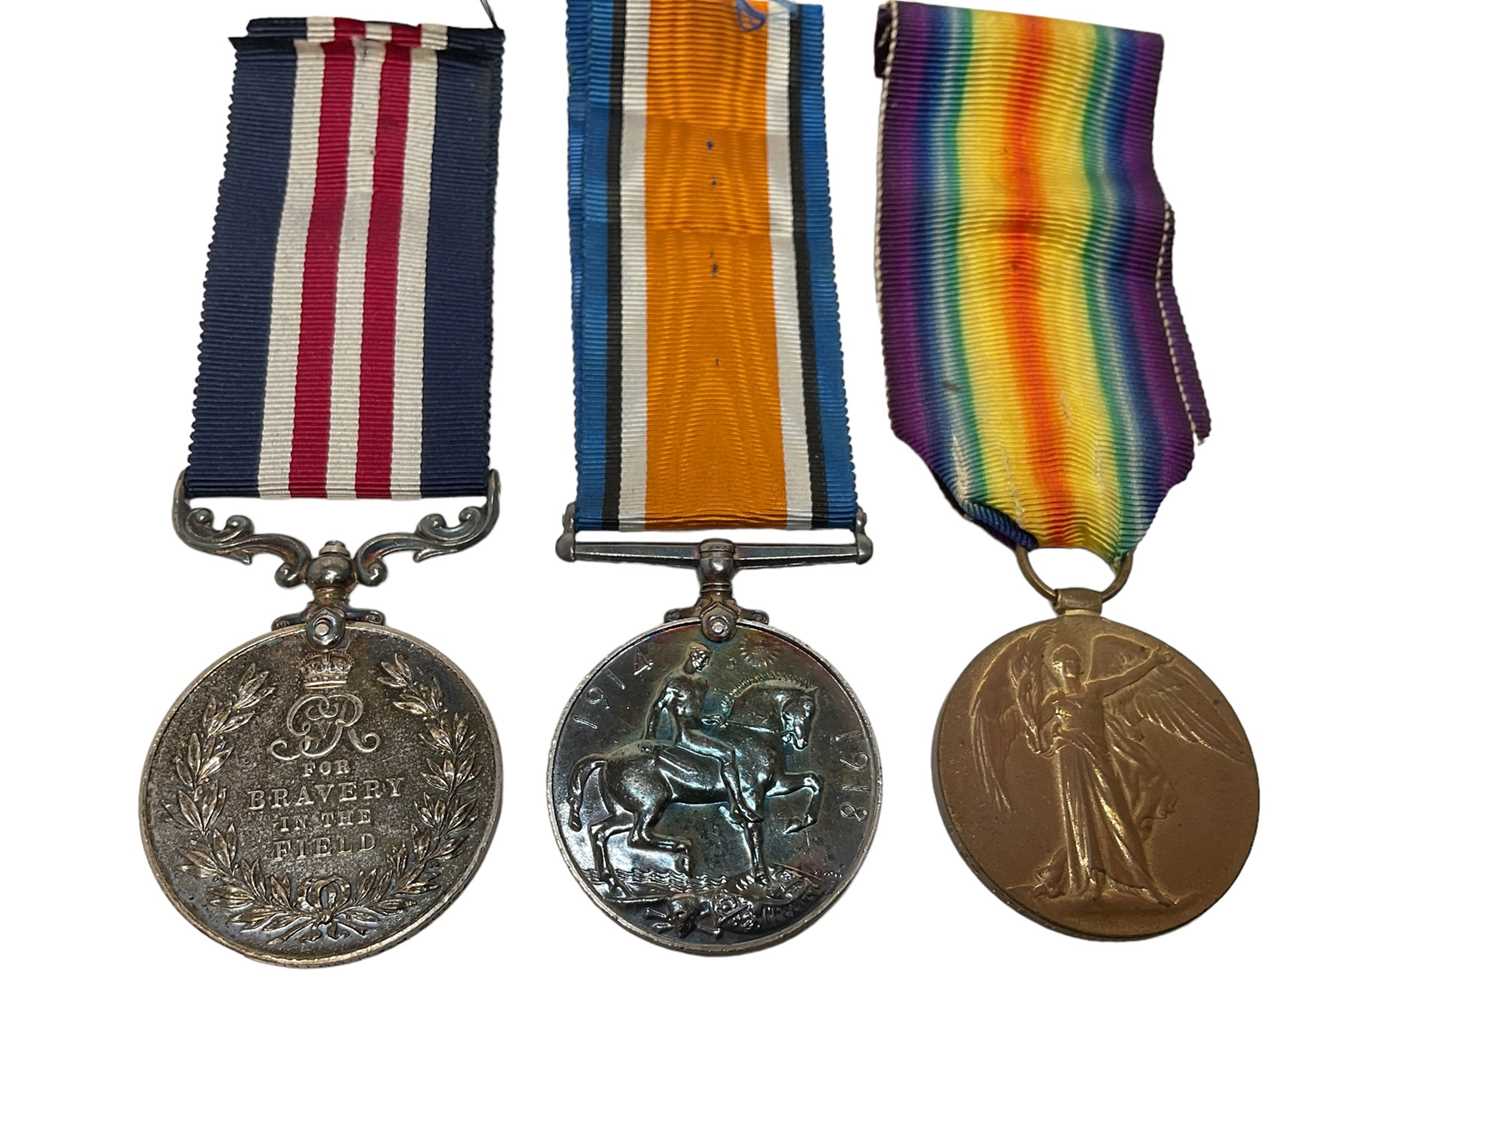 Lot 701 - First World War Military Medal (M.M.) Gallantry trio comprising M.M. named to 78092 PTE. H. Outen. 2/R.FUS. together with War and Victory medals named to 5229 PTE. H. Outen. R. Suss. R.